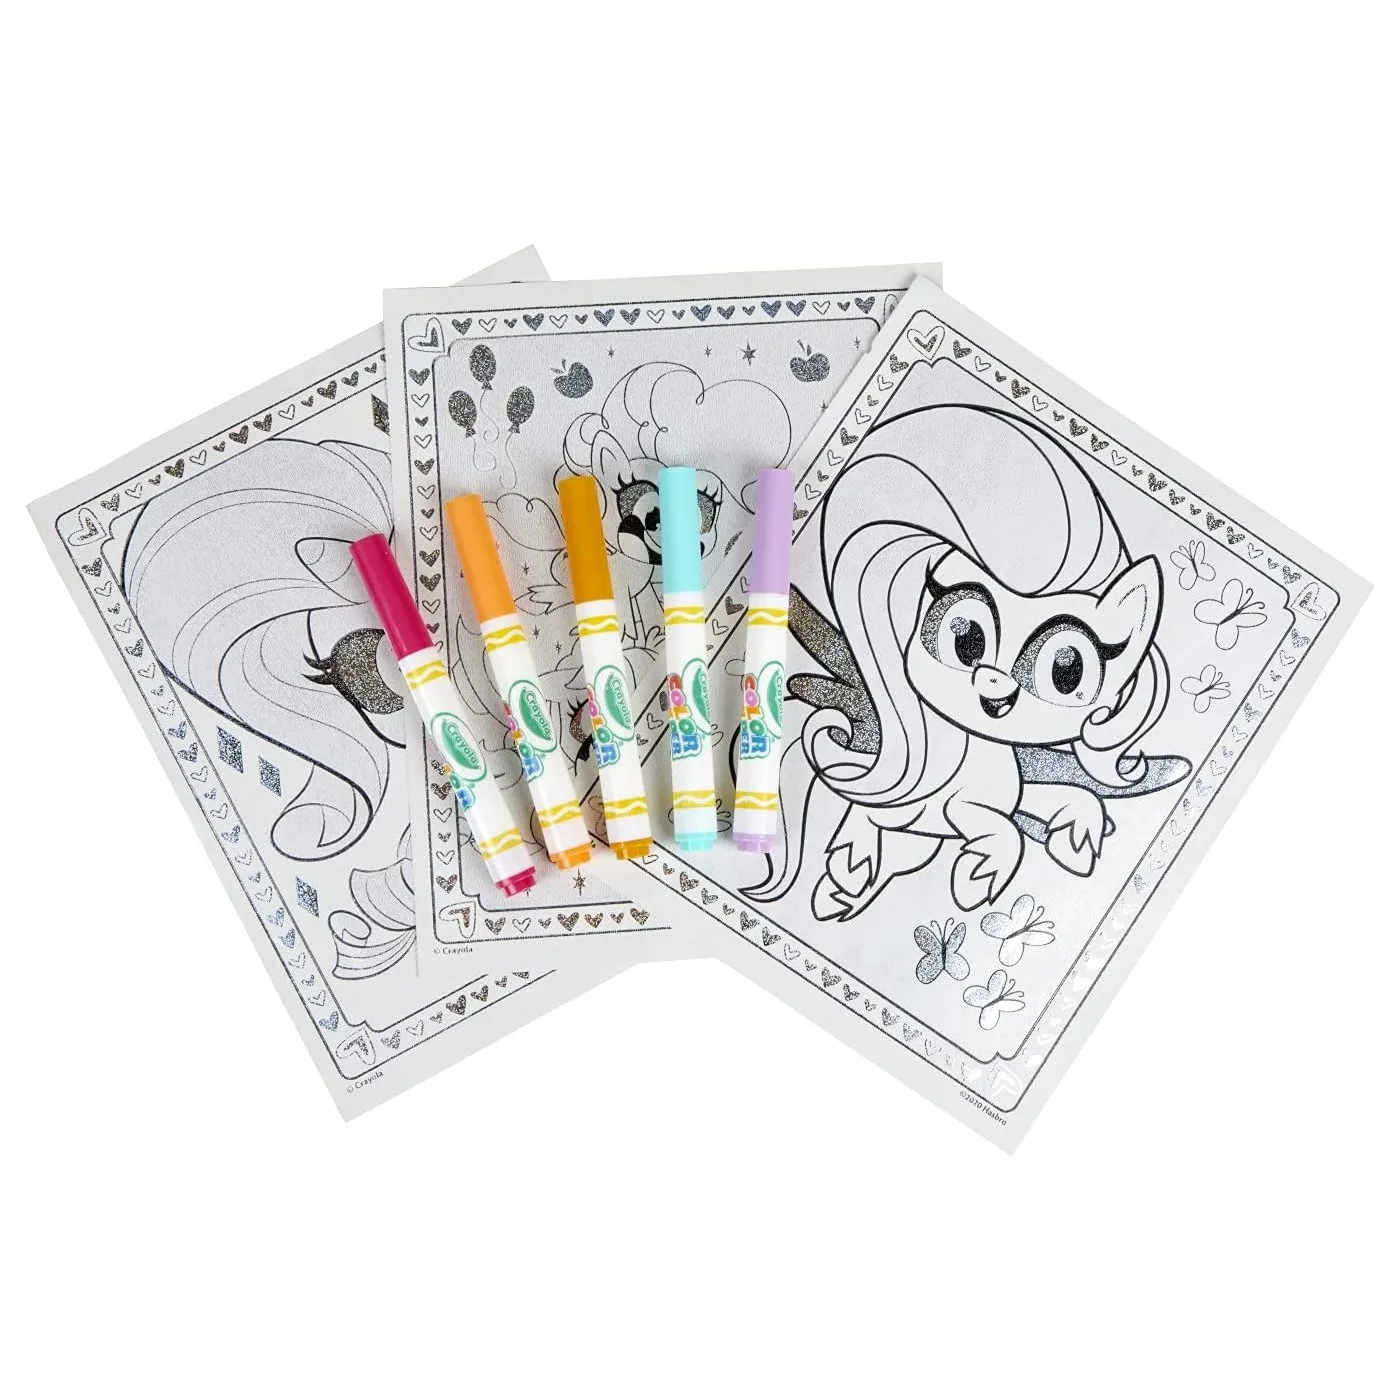  Crayola My Little Pony Coloring Pages and Stickers, Gift for  Kids, Ages 3, 4, 5, 6